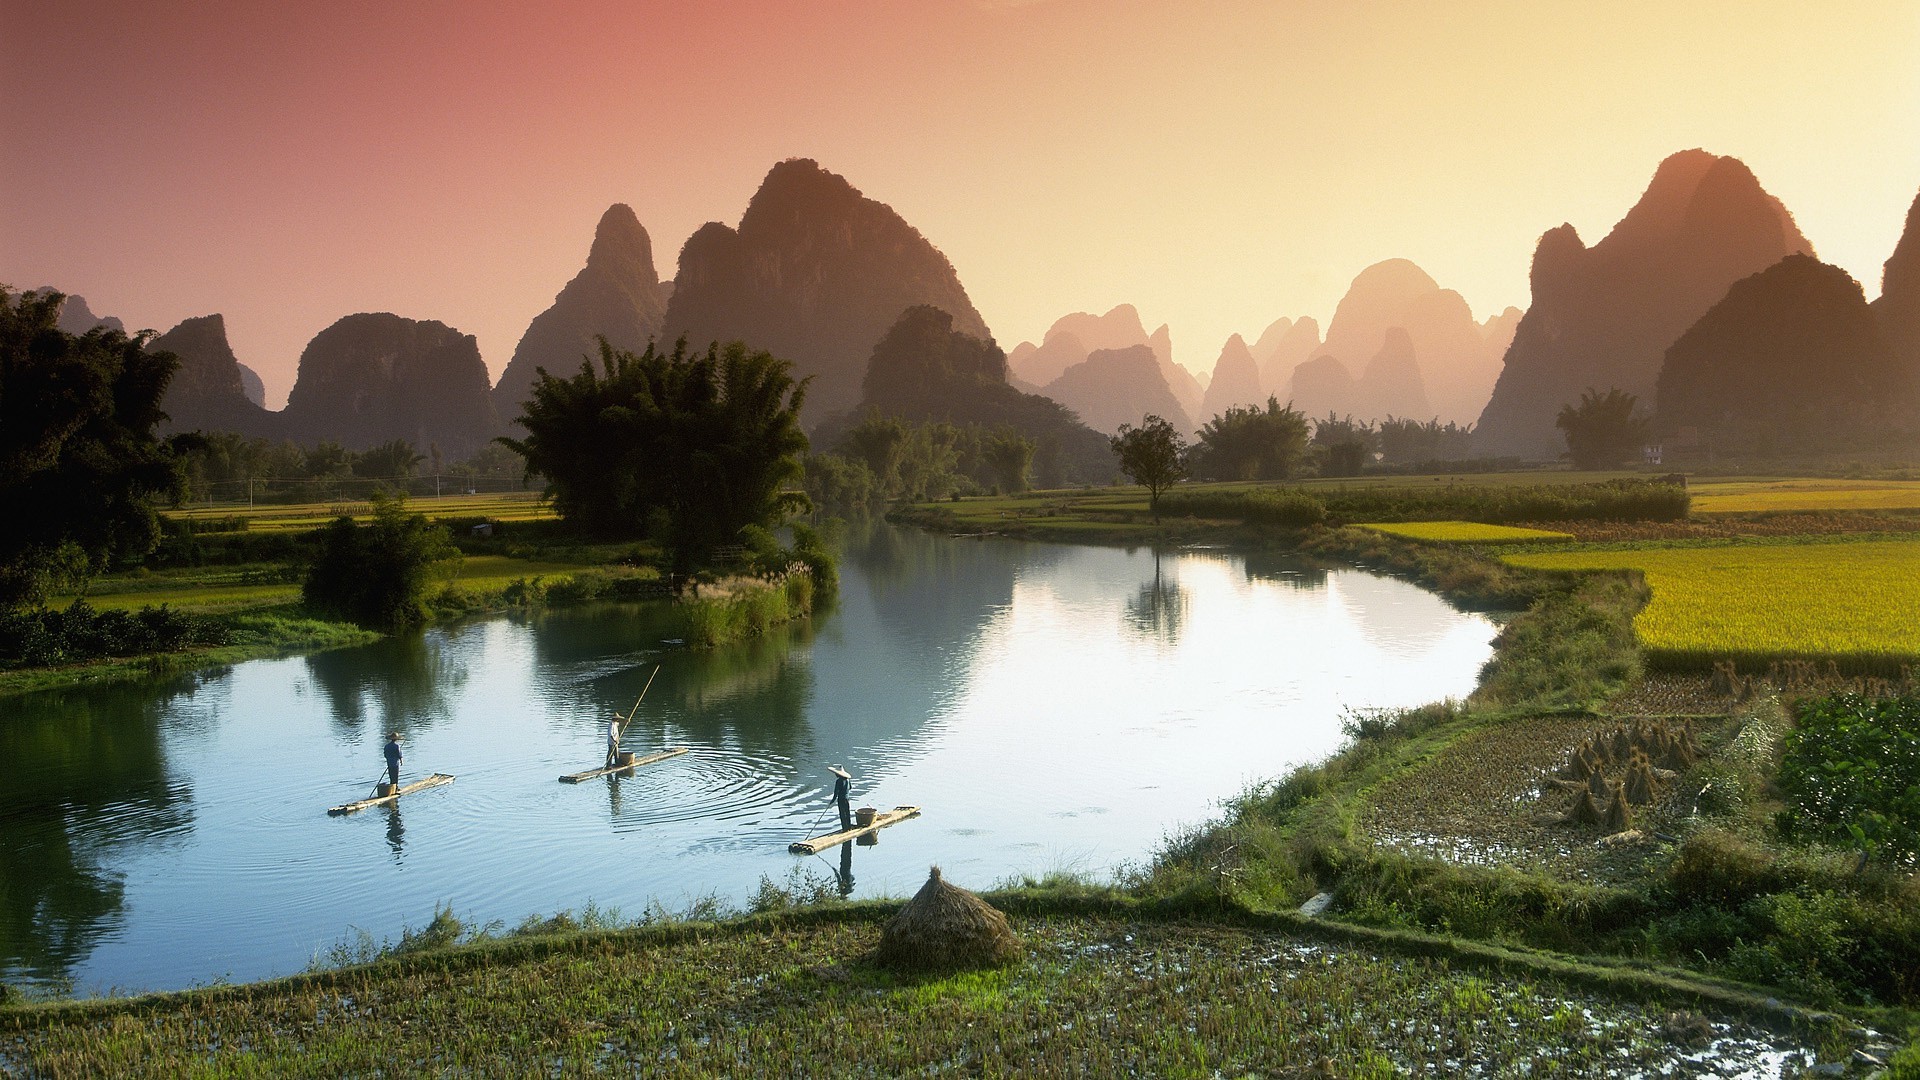 nature, Landscape, Mountain, Hill, Trees, Forest, Water, Sky, Vietnam, Asia, River, Boats, Men, Field, Rice Paddy, Palm Trees Wallpaper